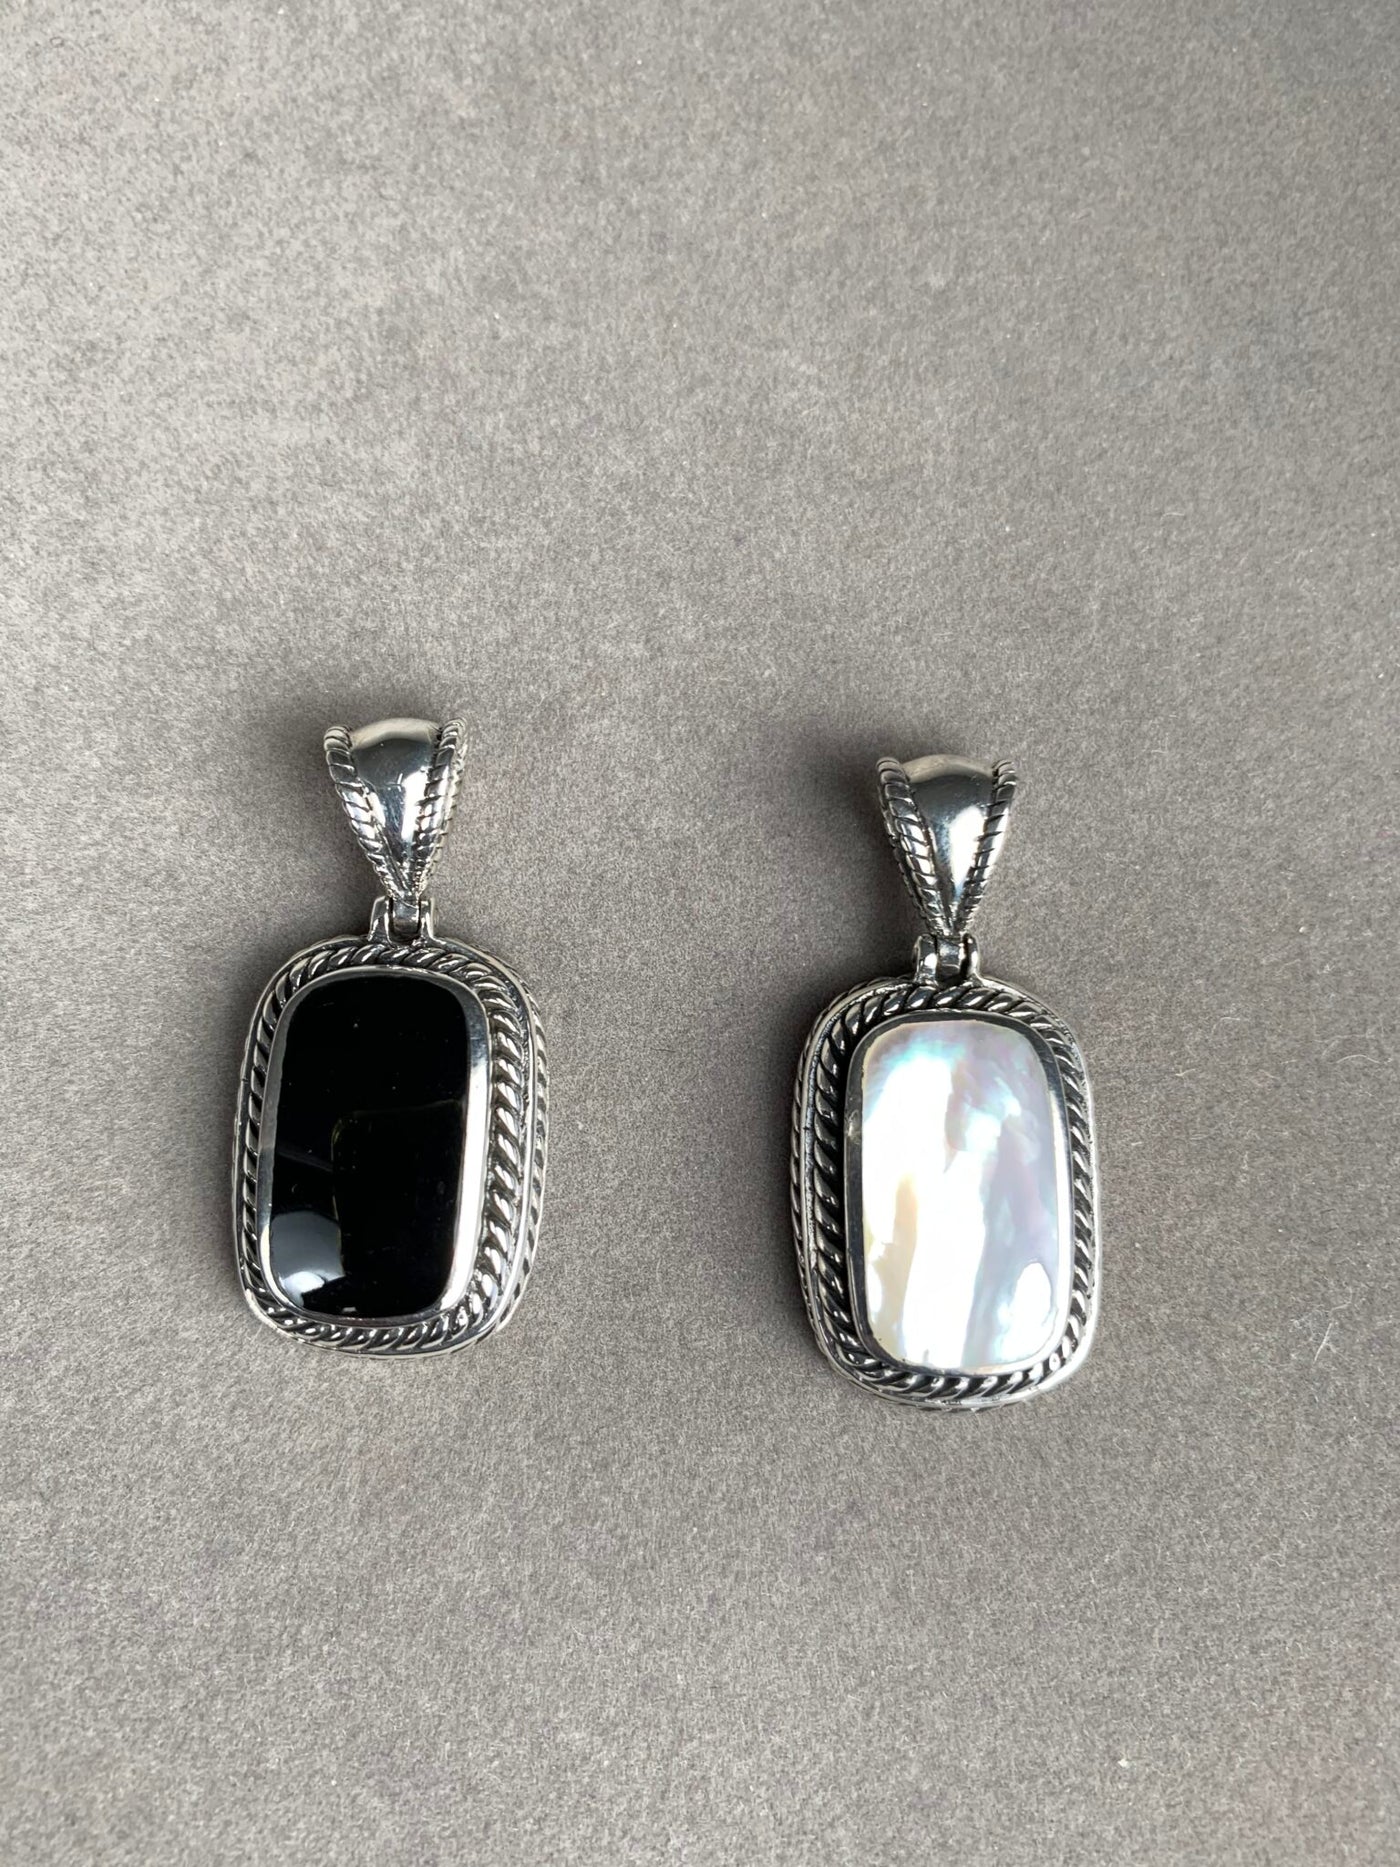 Sterling Silver and Rectangular Black Onyx Pendant